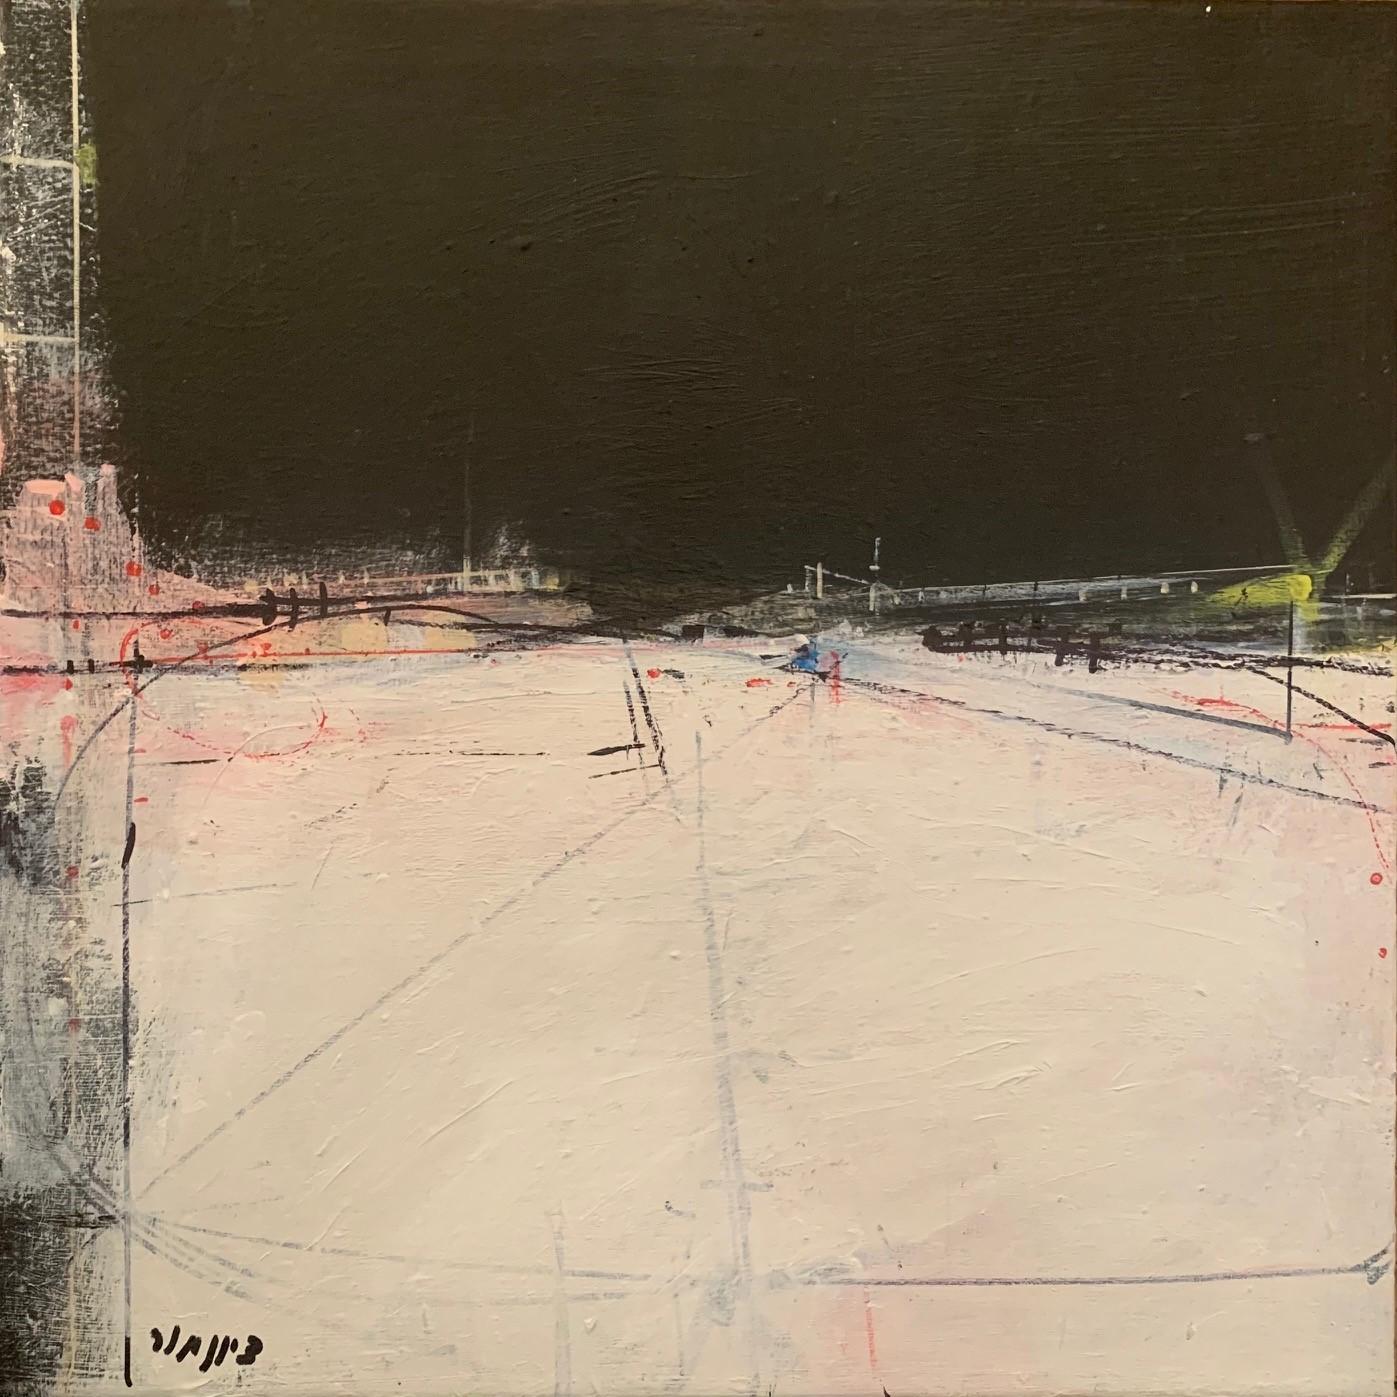 Zion Mor Landscape Painting - "Mystery" Contemporary Abstract Expressionist Minimalist Urban Landscape